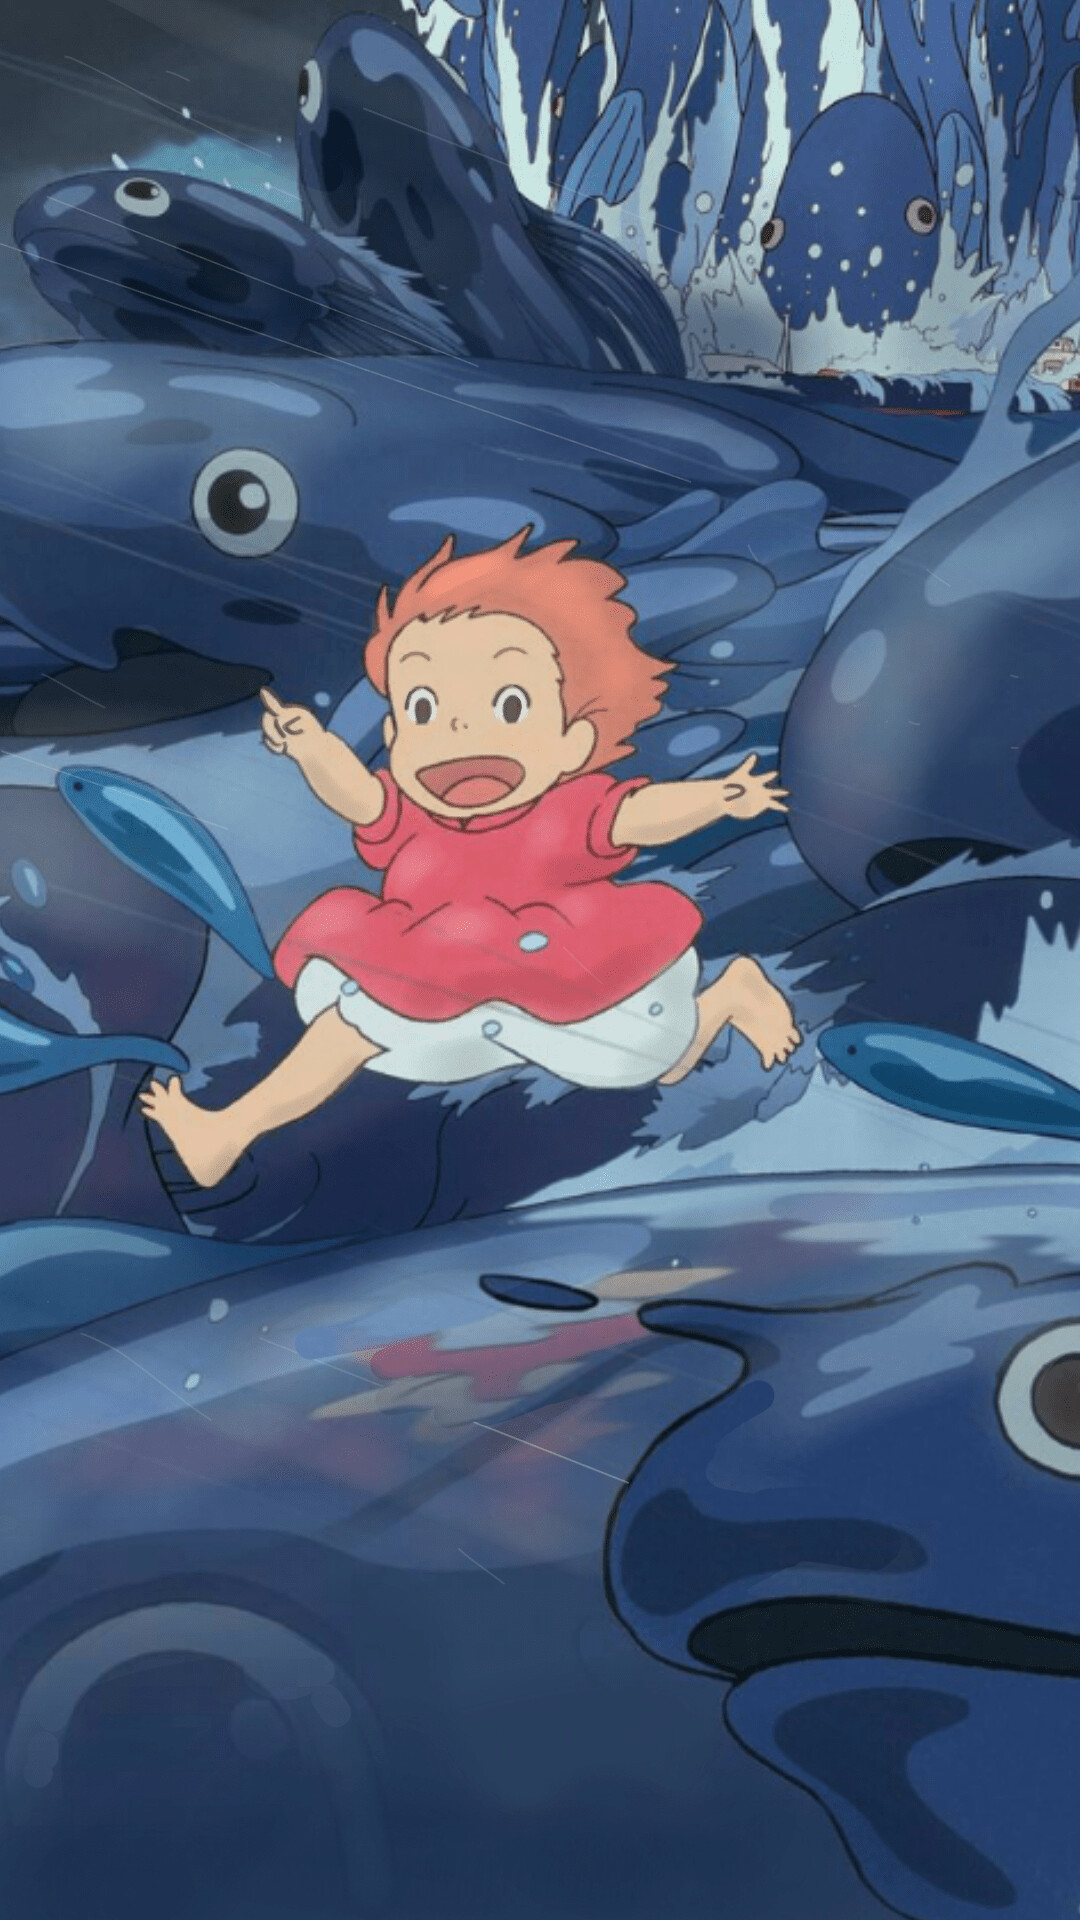 Ponyo: An animated film about the friendship between five-year-old Sosuke and a magical goldfish. 1080x1920 Full HD Wallpaper.